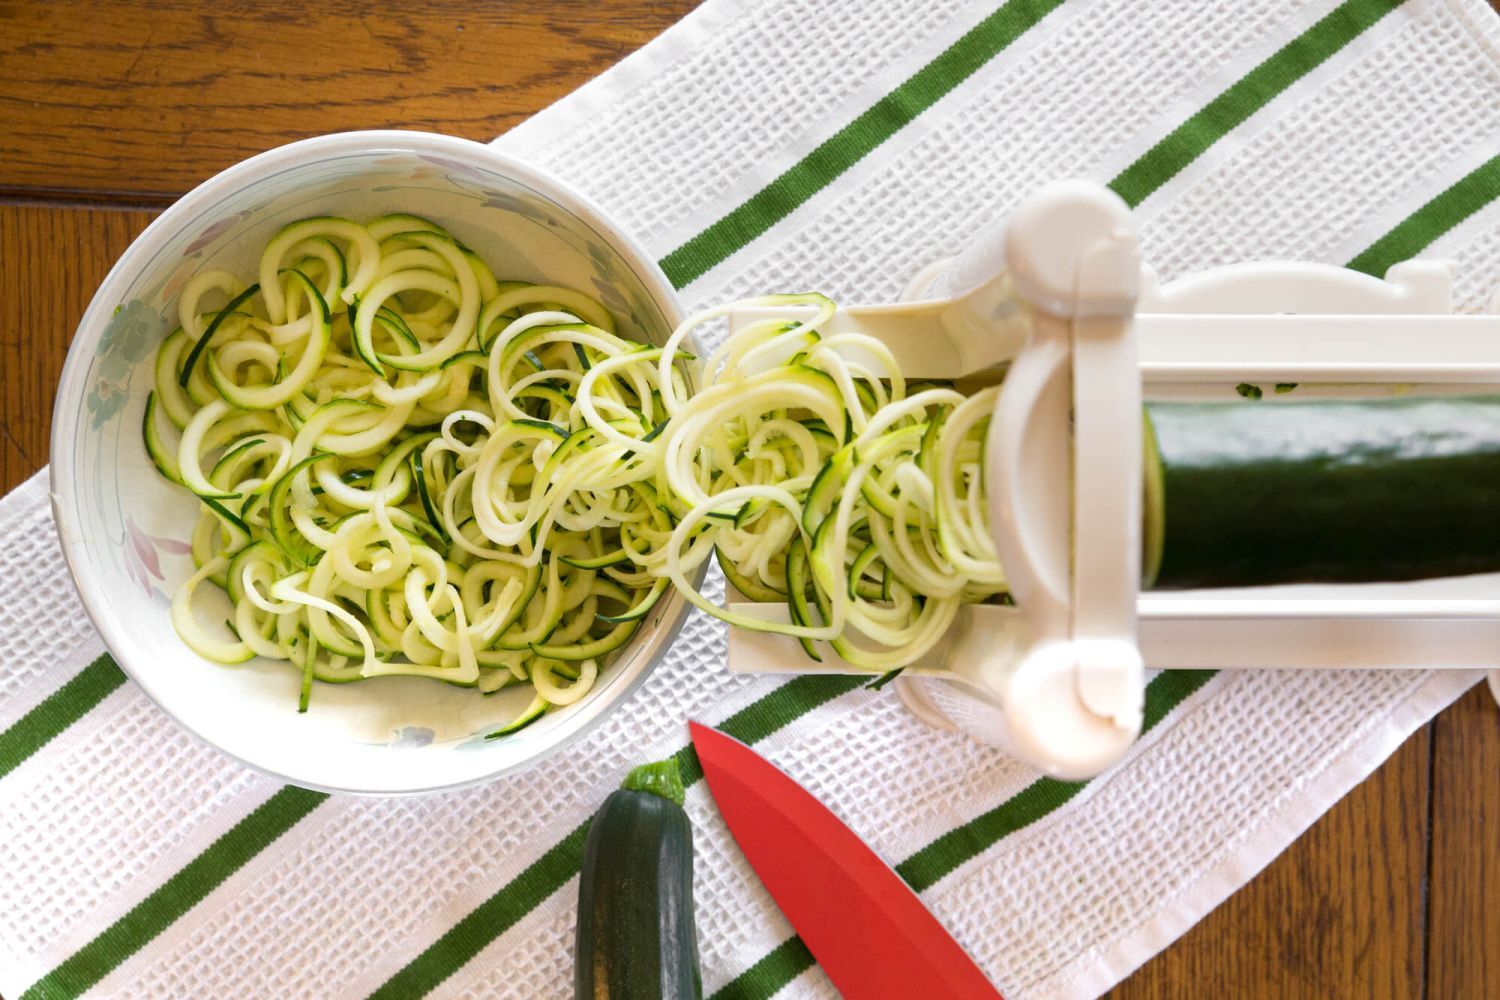 Plate of zucchini noodles being made with a spiralizer.